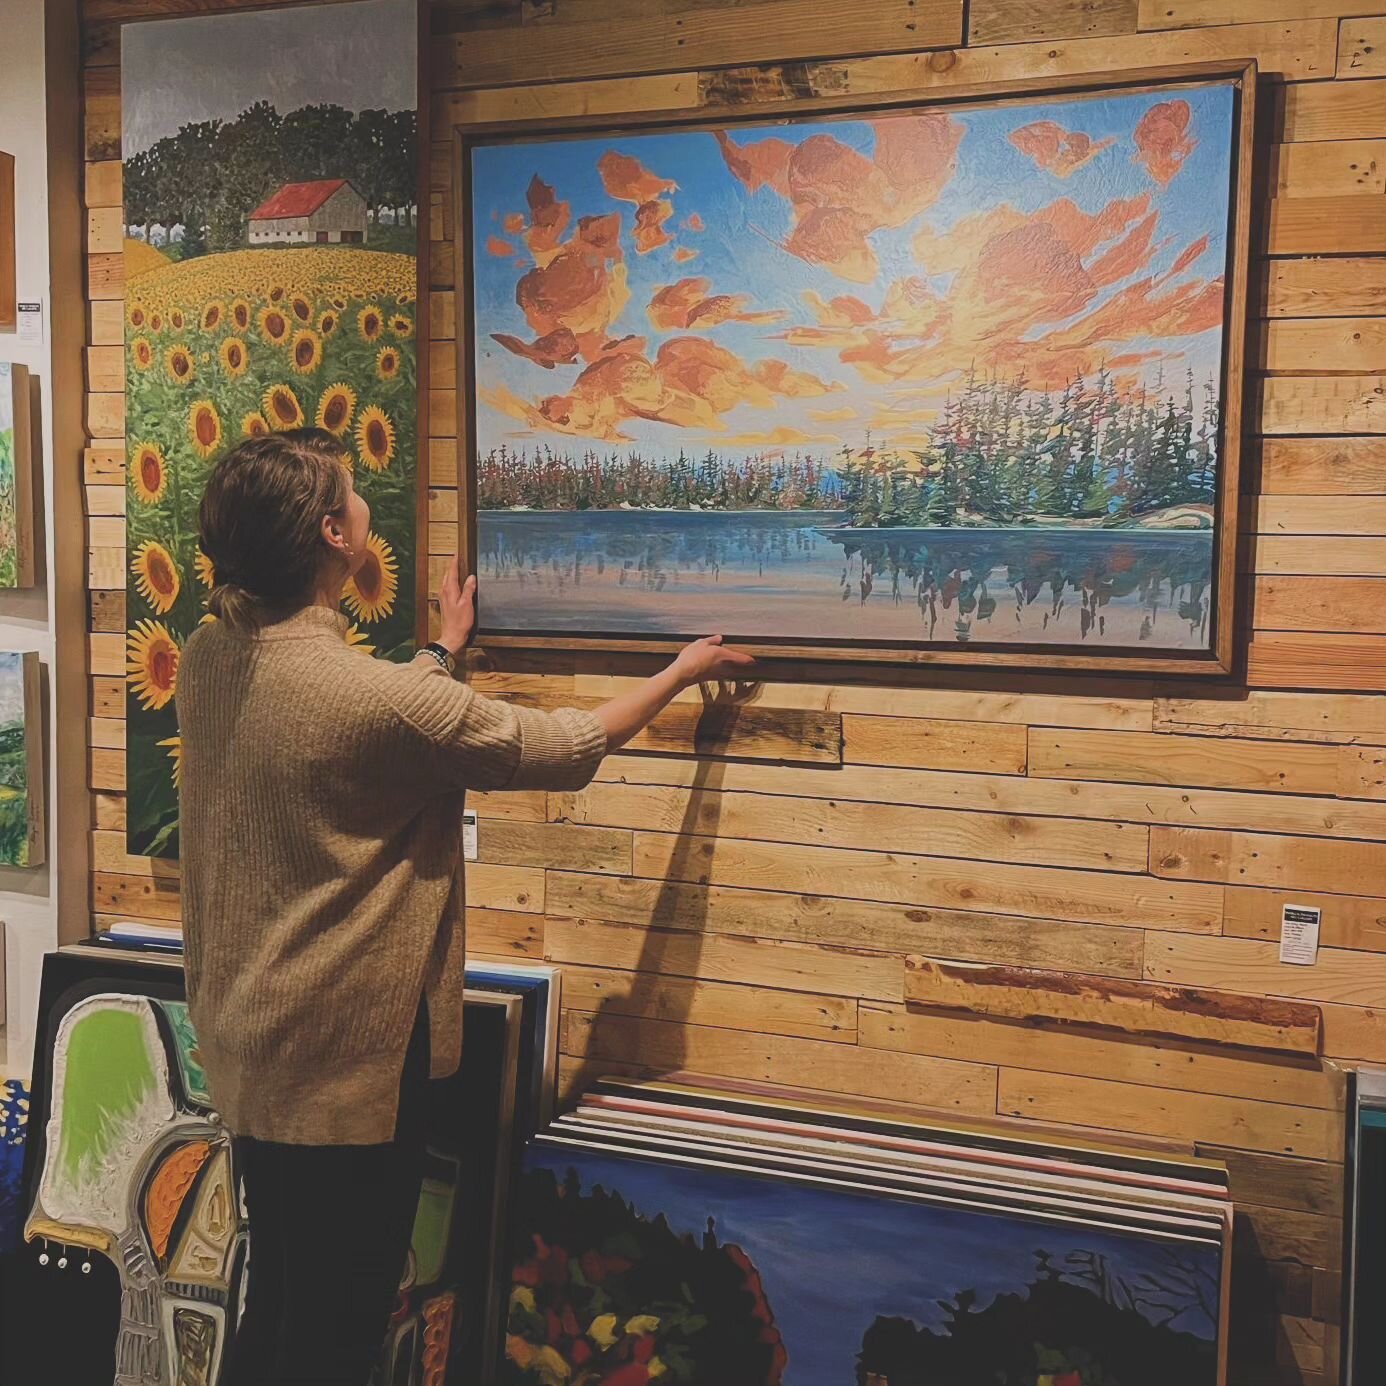 Night time photo shoot with Amber Sky @matilda.galleryartbar, taken by @artbyclaire.ca 

Love how the Gallery's wooden wall shows off its farmhouse style frame and accentuates the paintings warmth 🧡💙

Thanks for the photo Claire!

Checkout Amber Sk